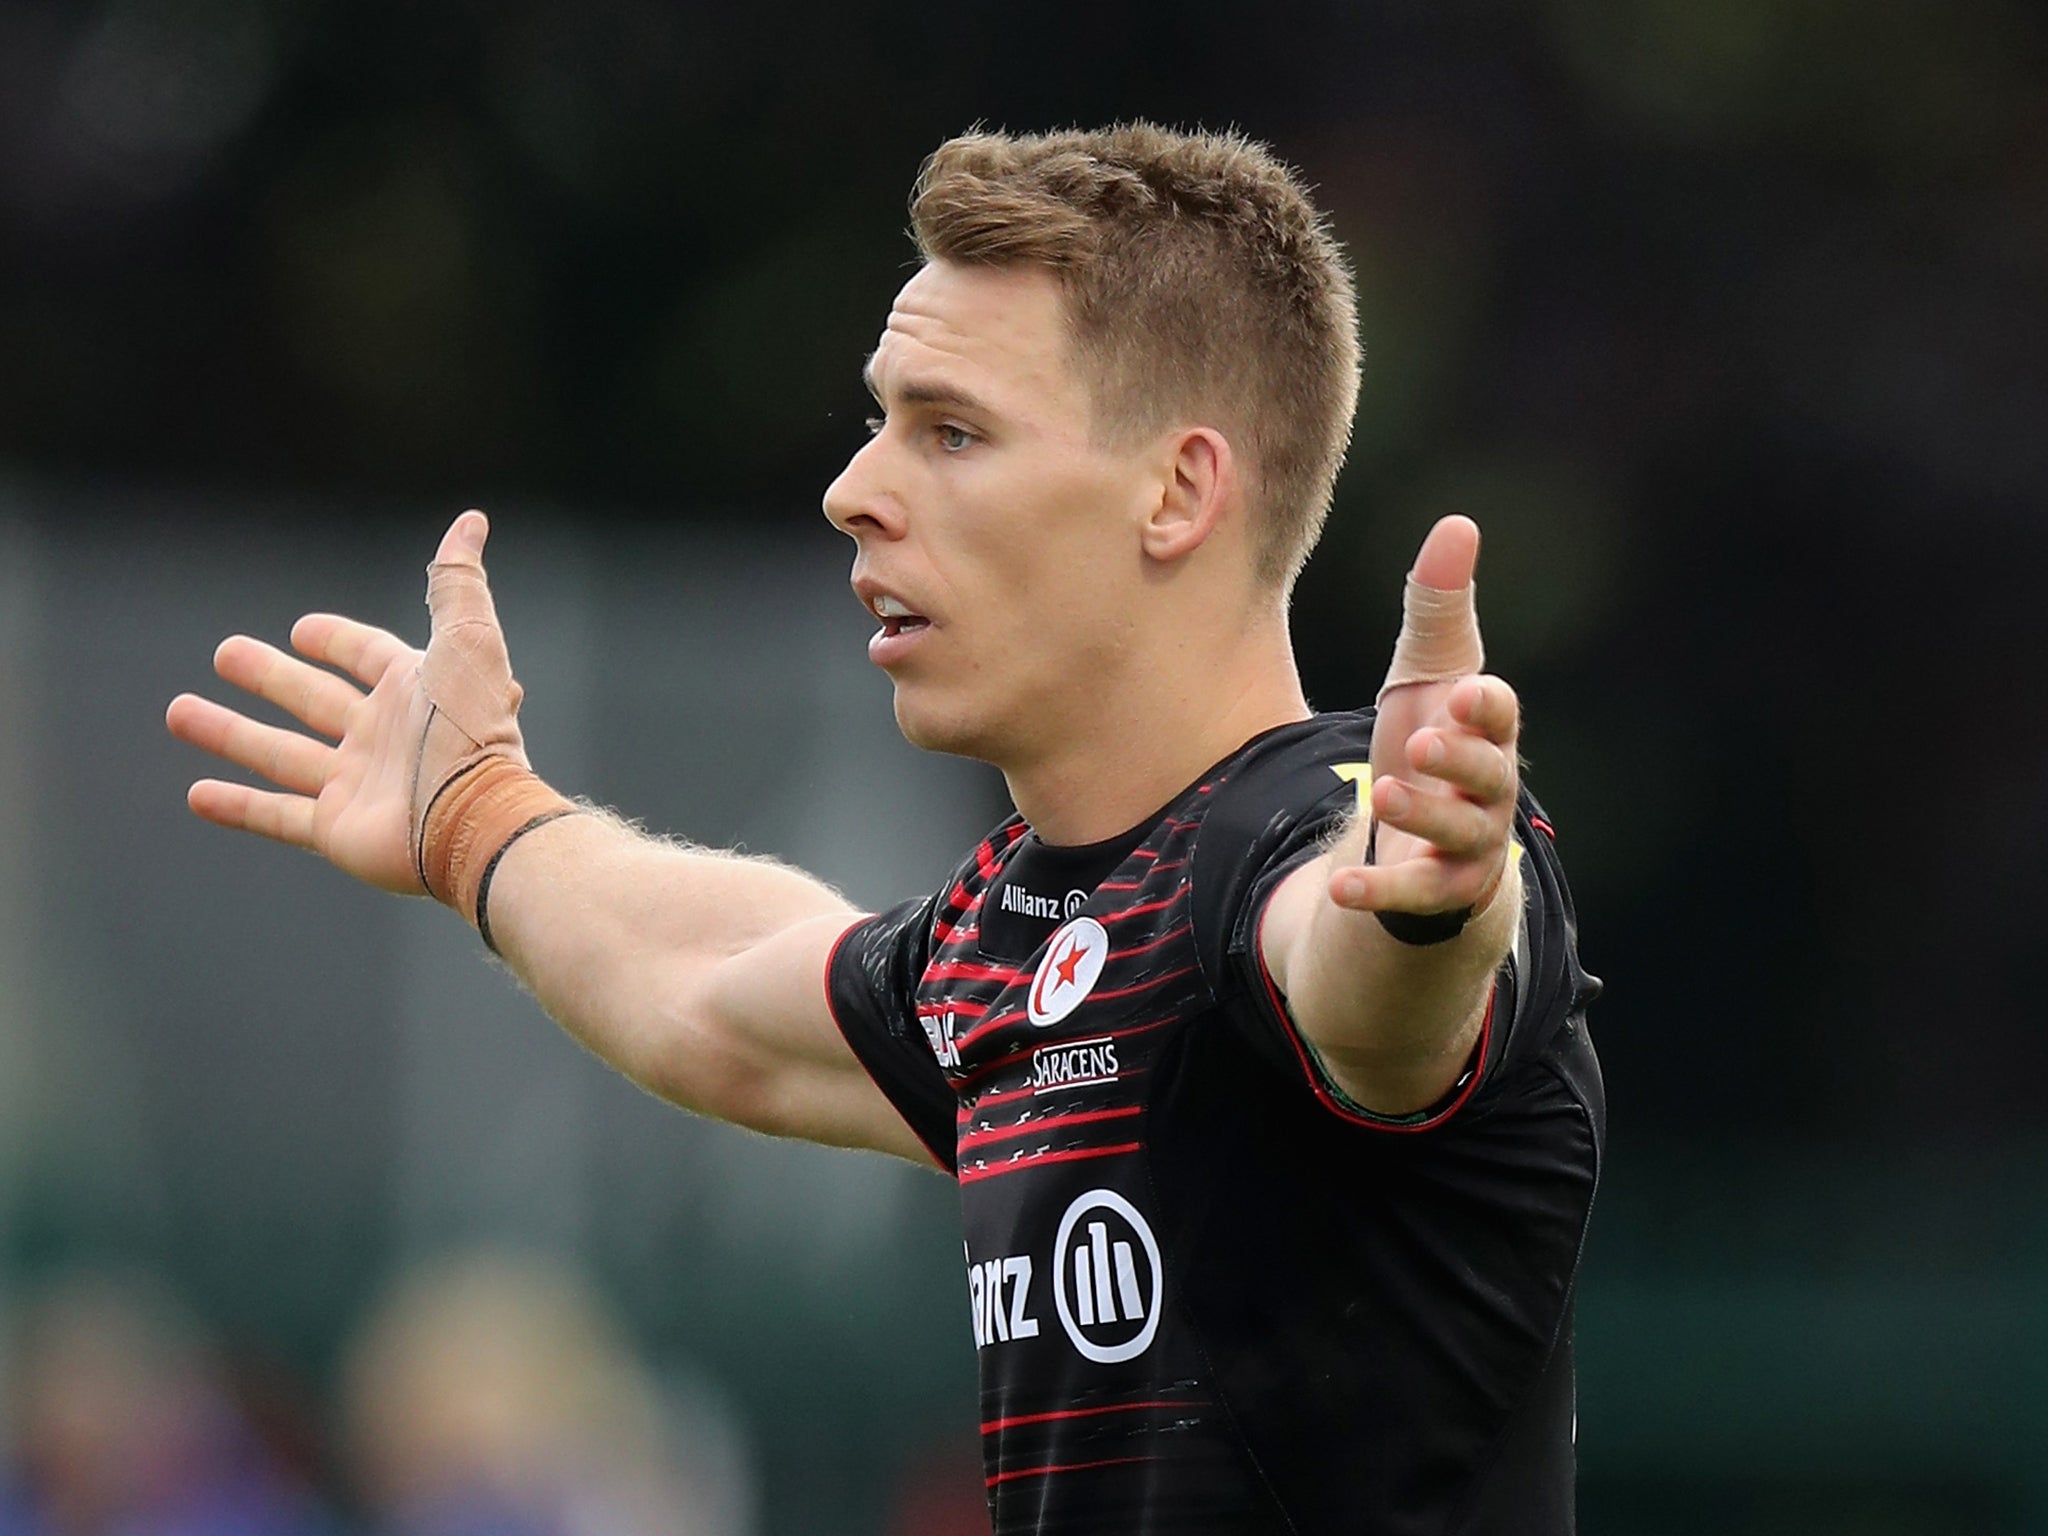 Liam Williams returns from a two-month groin injury to start for Saracens against Ospreys